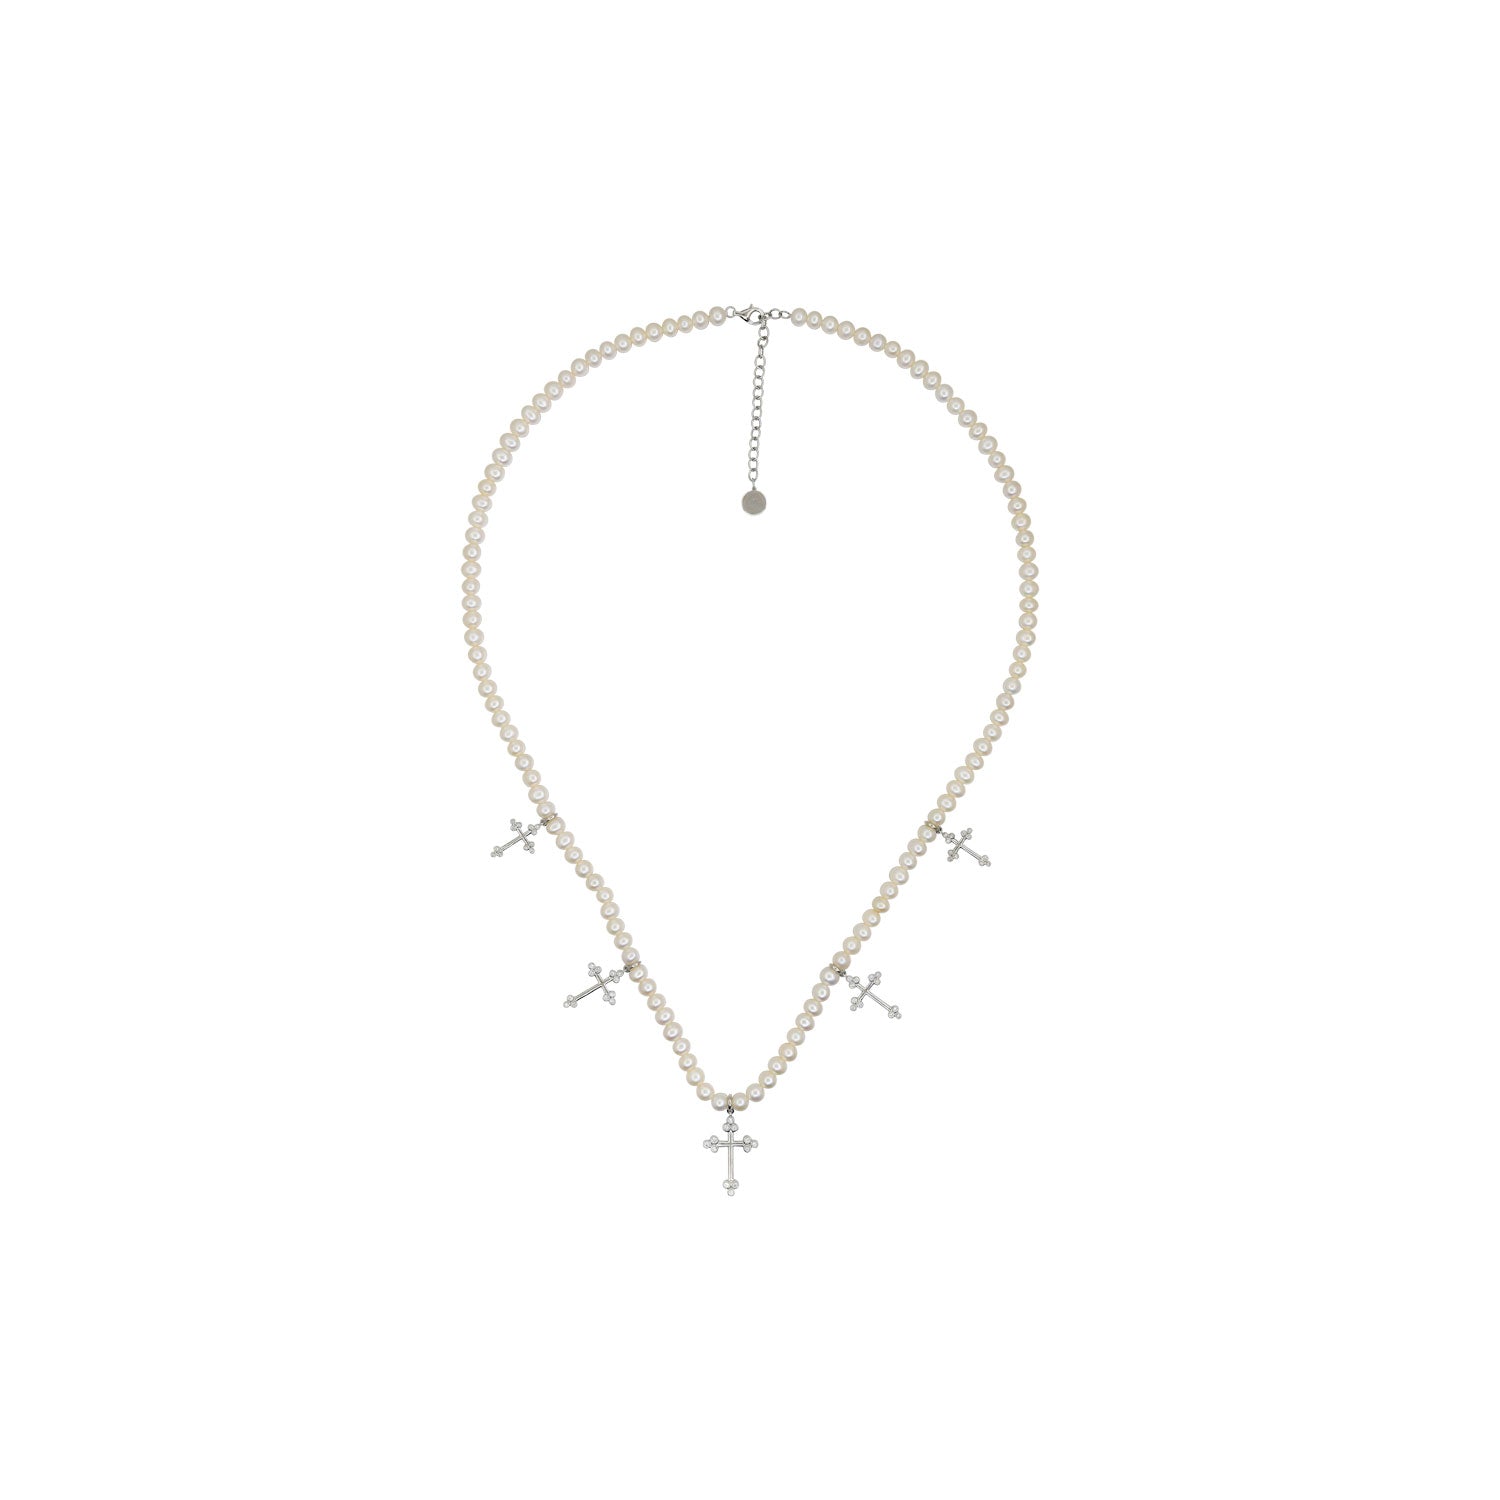 pearl_fifth_crosse_necklace_14k_white_gold_3